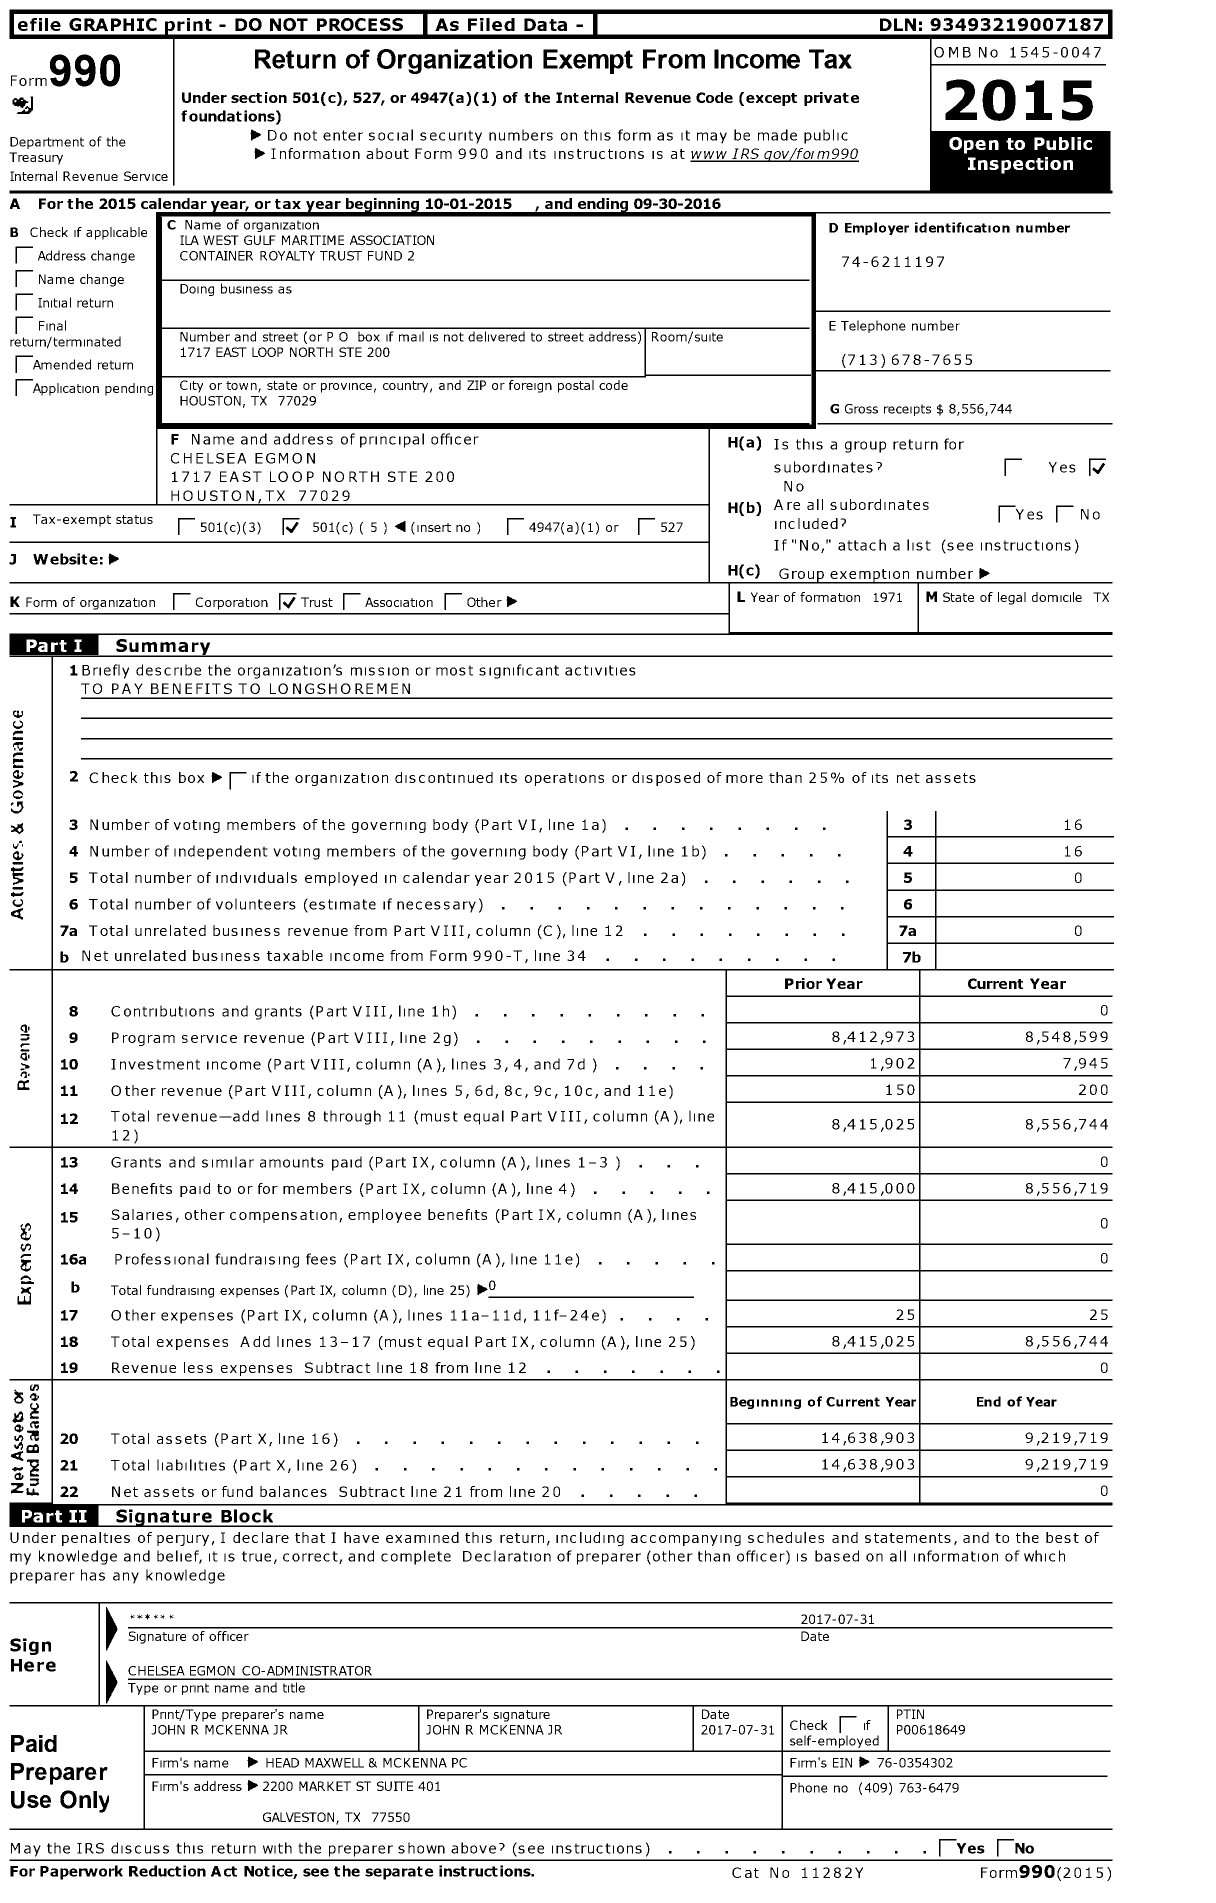 Image of first page of 2015 Form 990O for Ila West Gulf Maritime Association Container Royalty Trust Fund 2